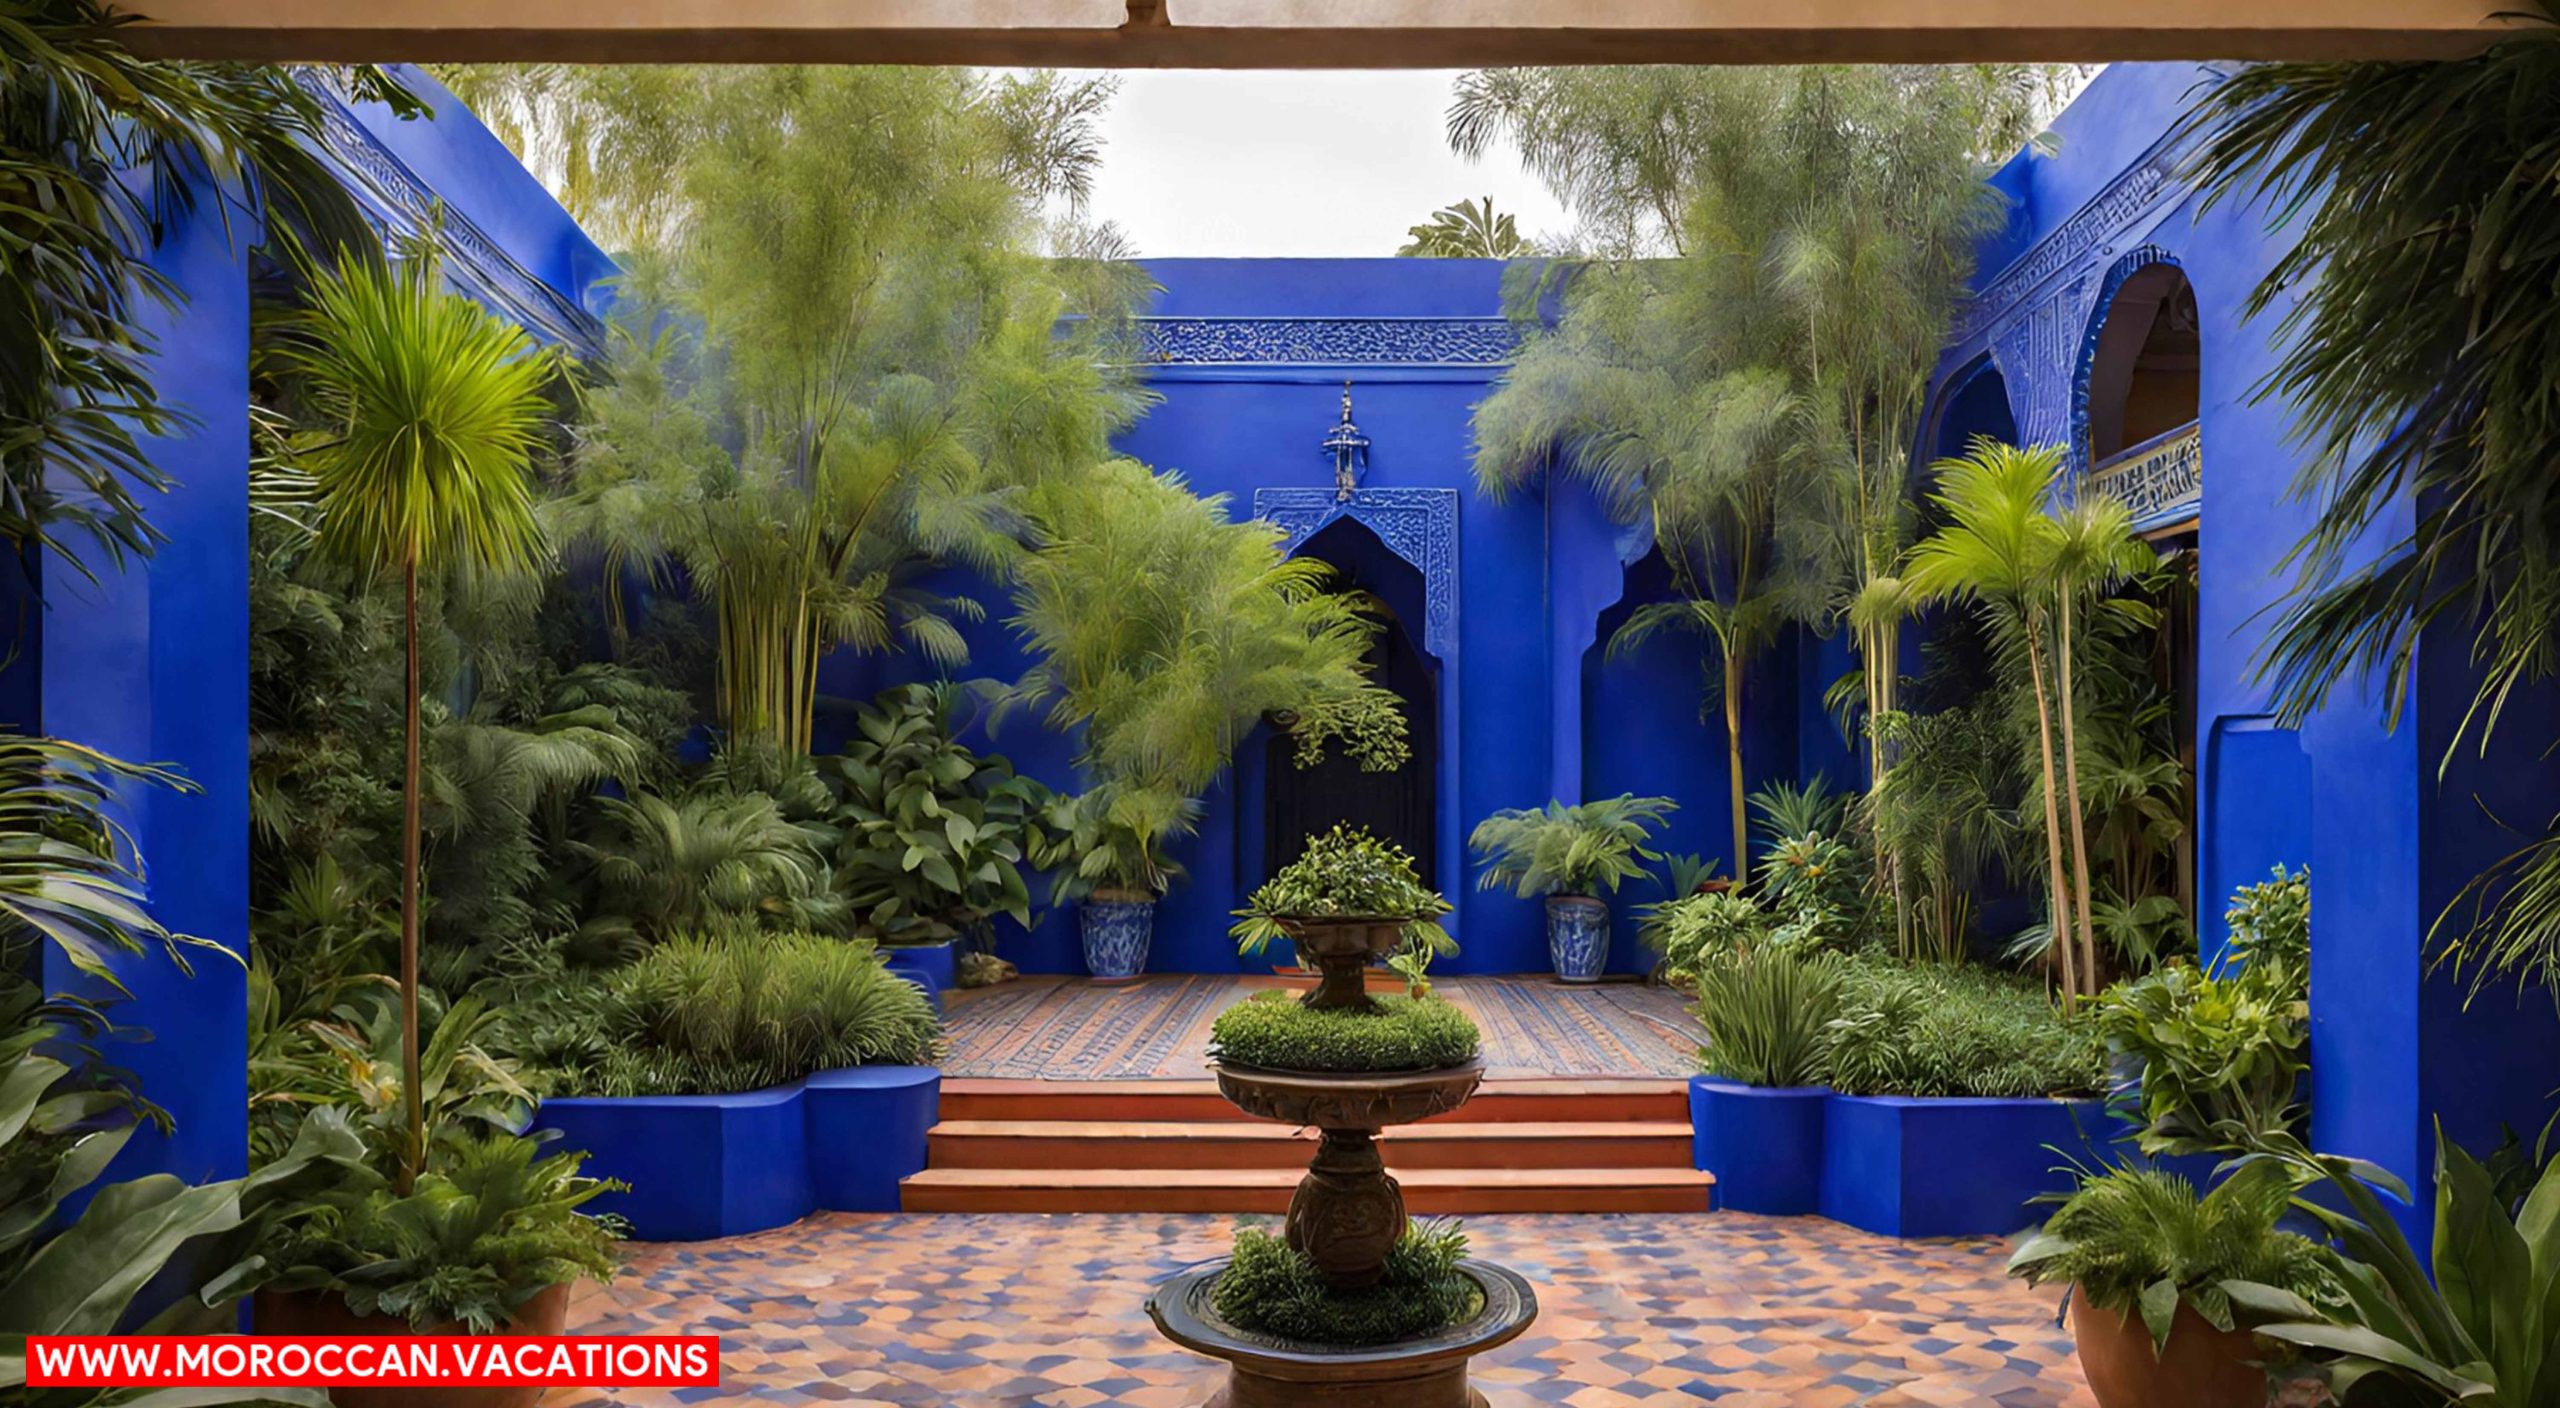 Lush greenery, Capture the central pavilion, surrounded by meticulously arranged exotic plants.